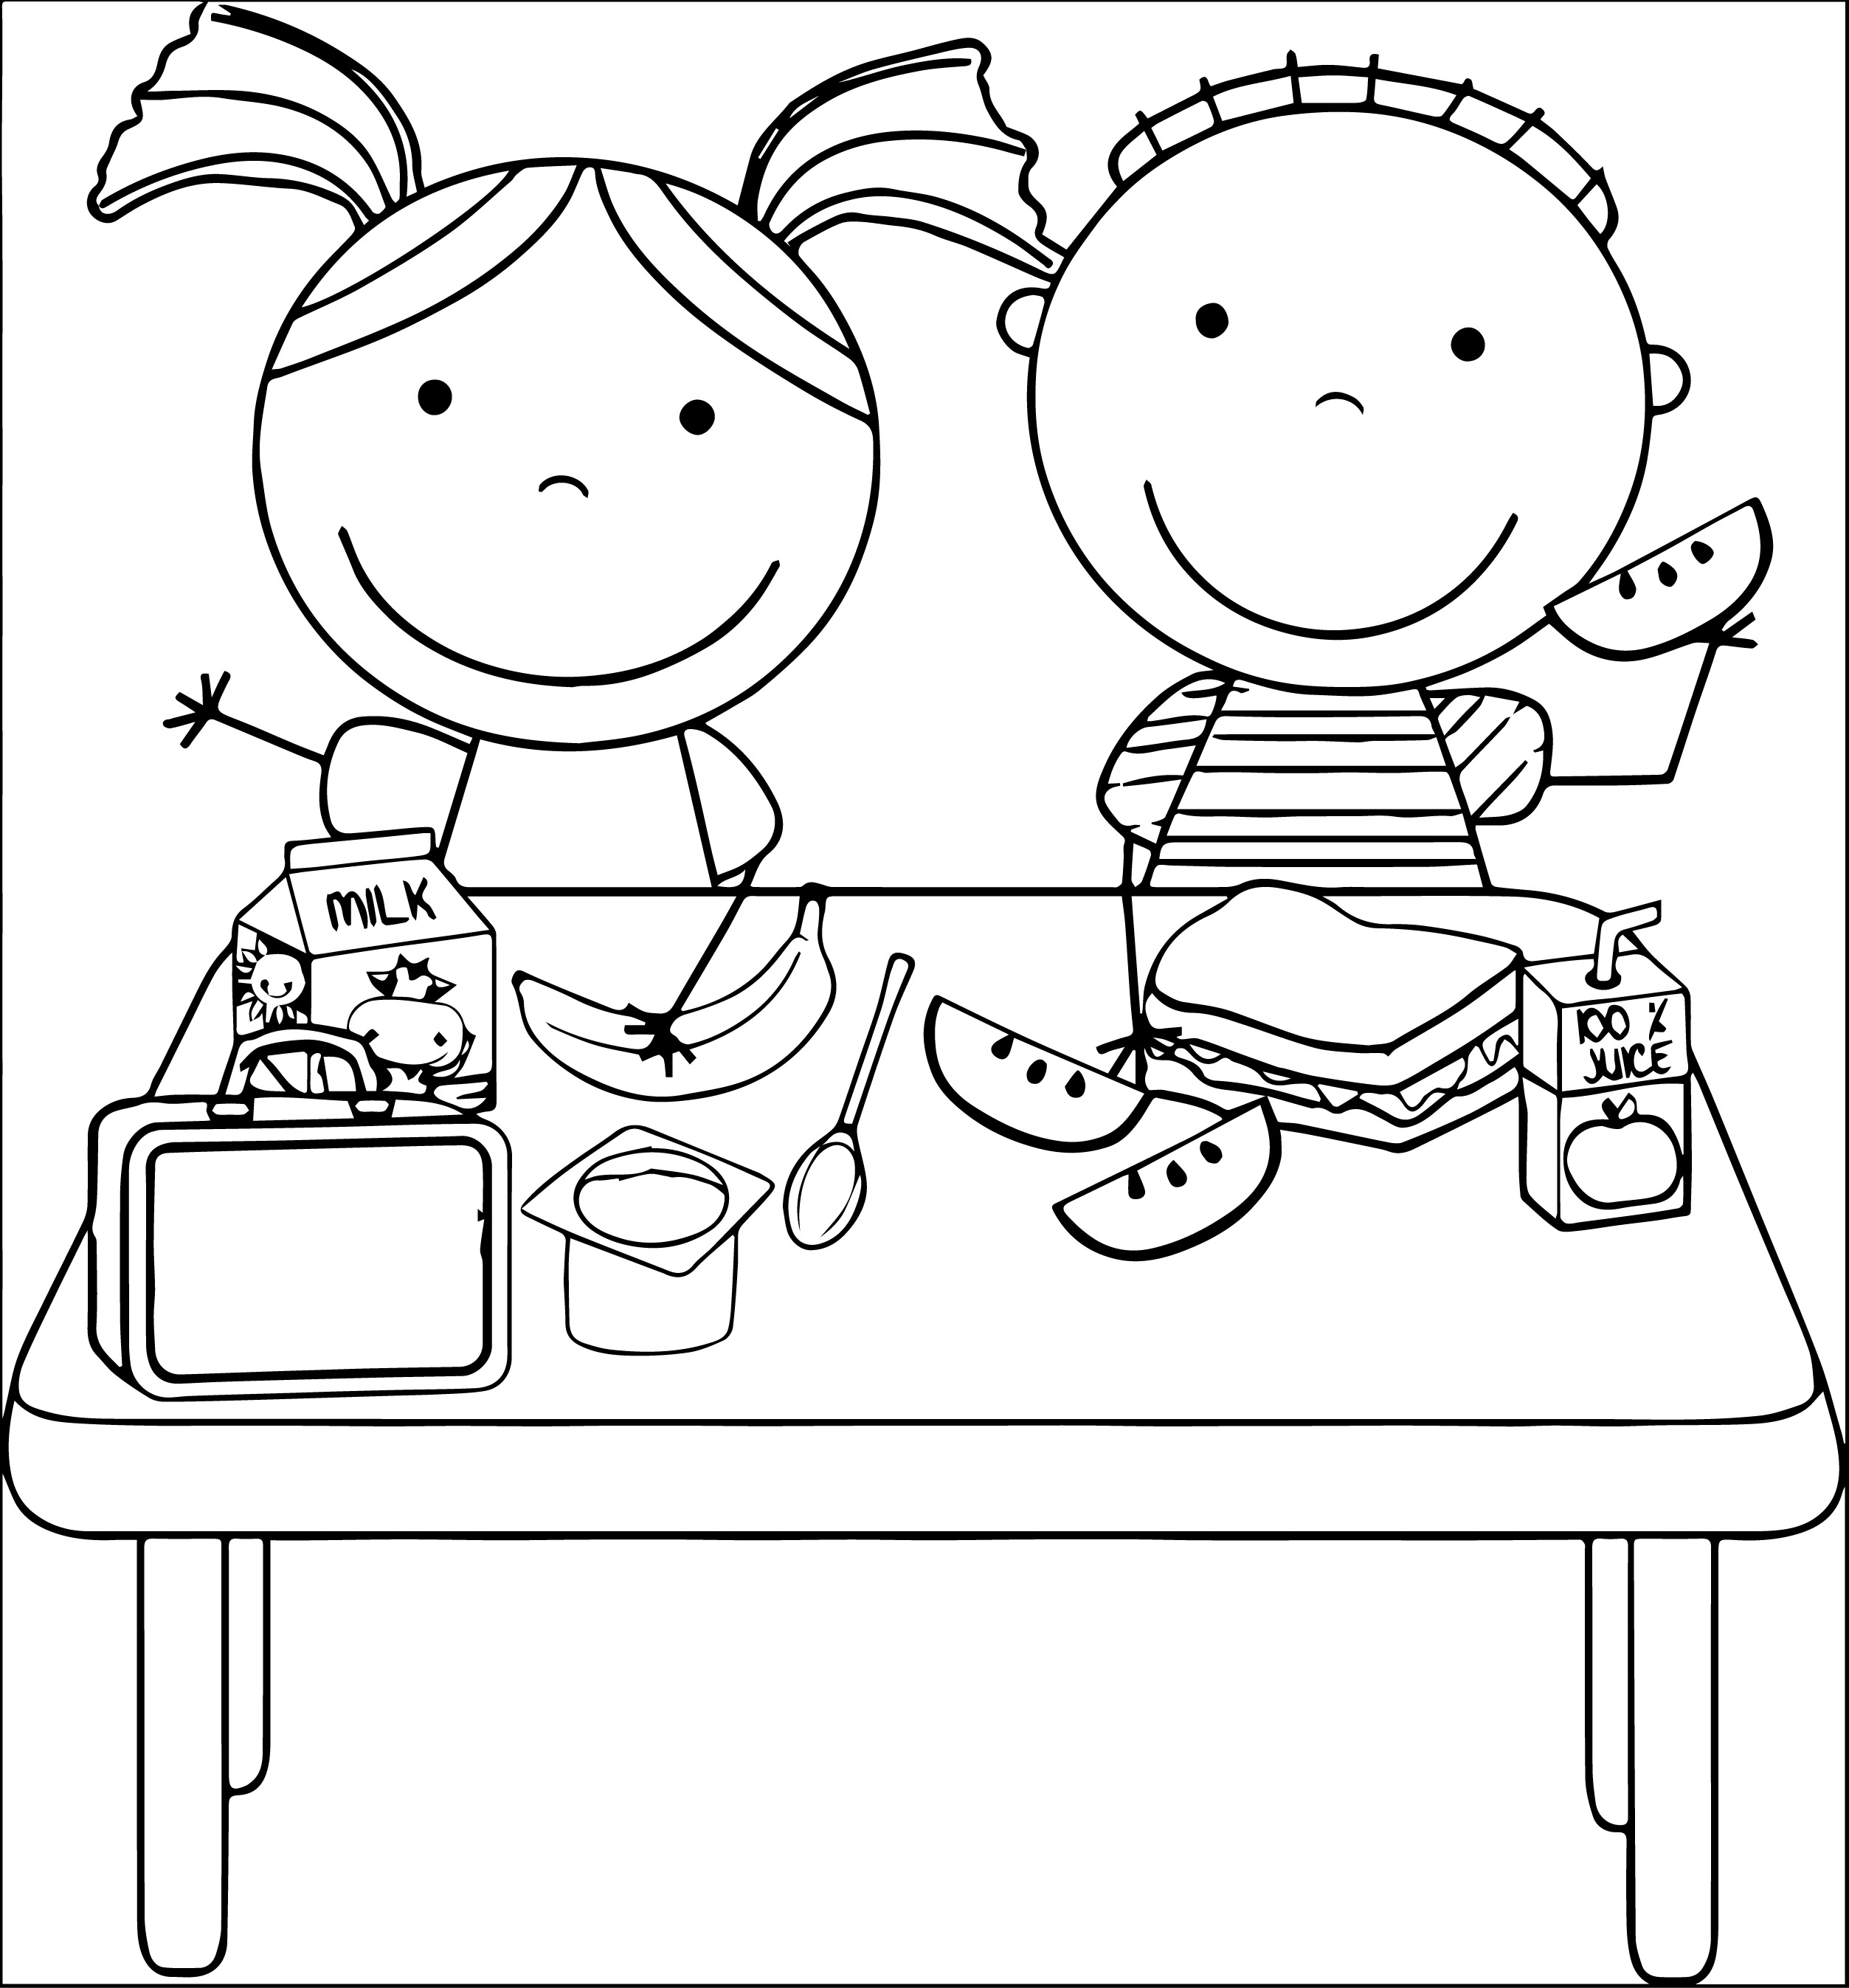 healthy foods for kids clipart black and white